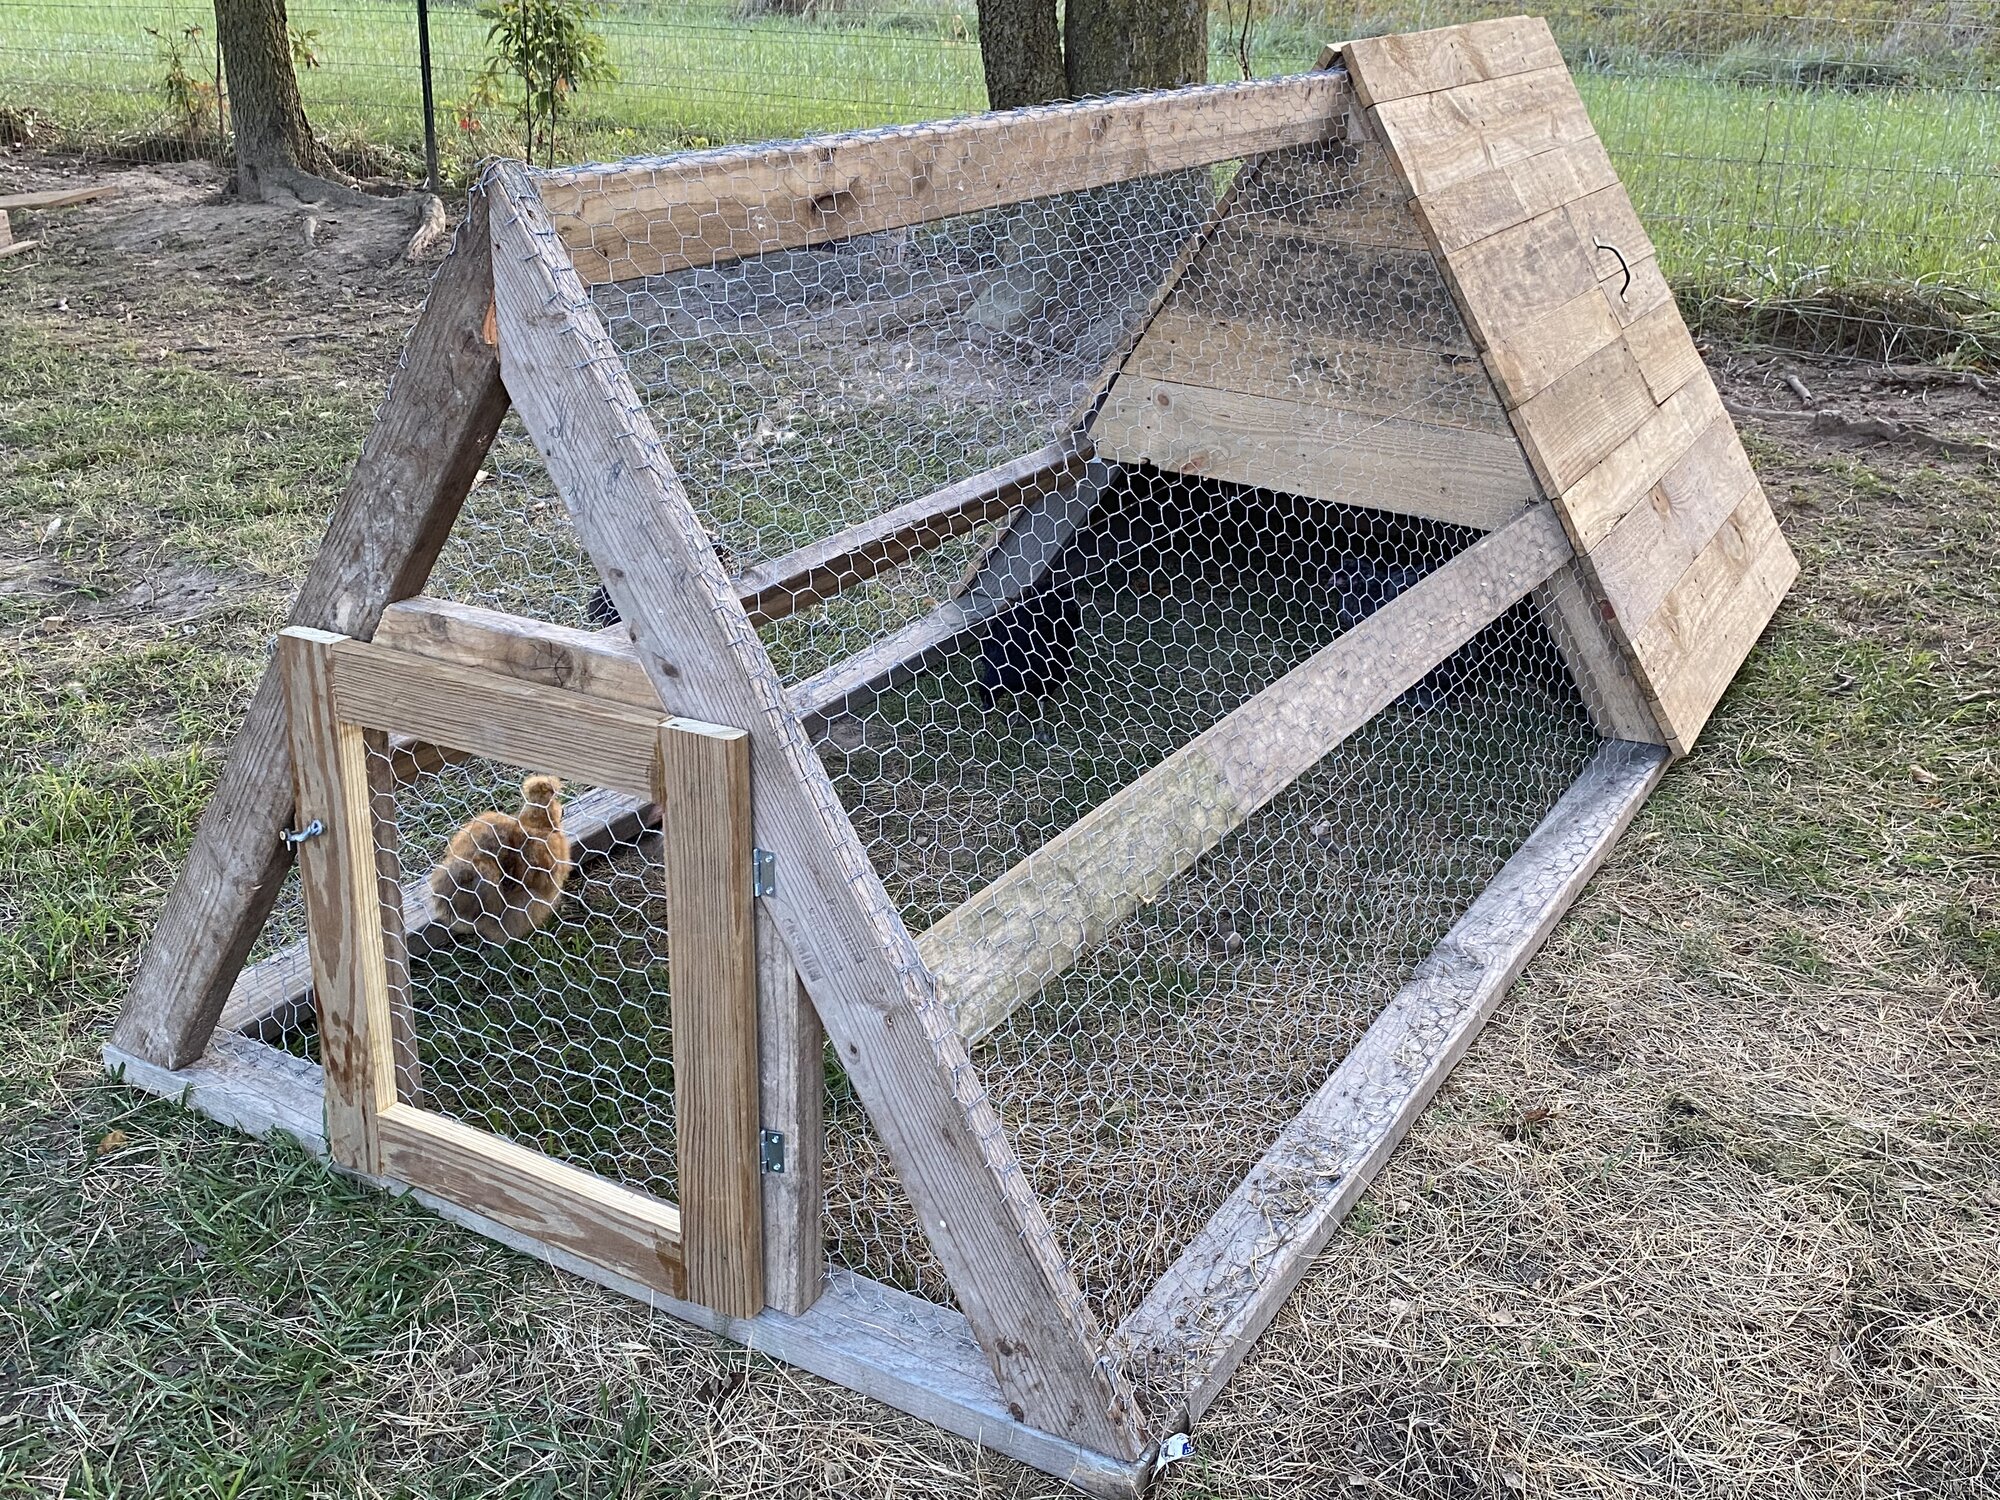 Wooden Pallet Mini Coop | BackYard Chickens - Learn How to Raise Chickens